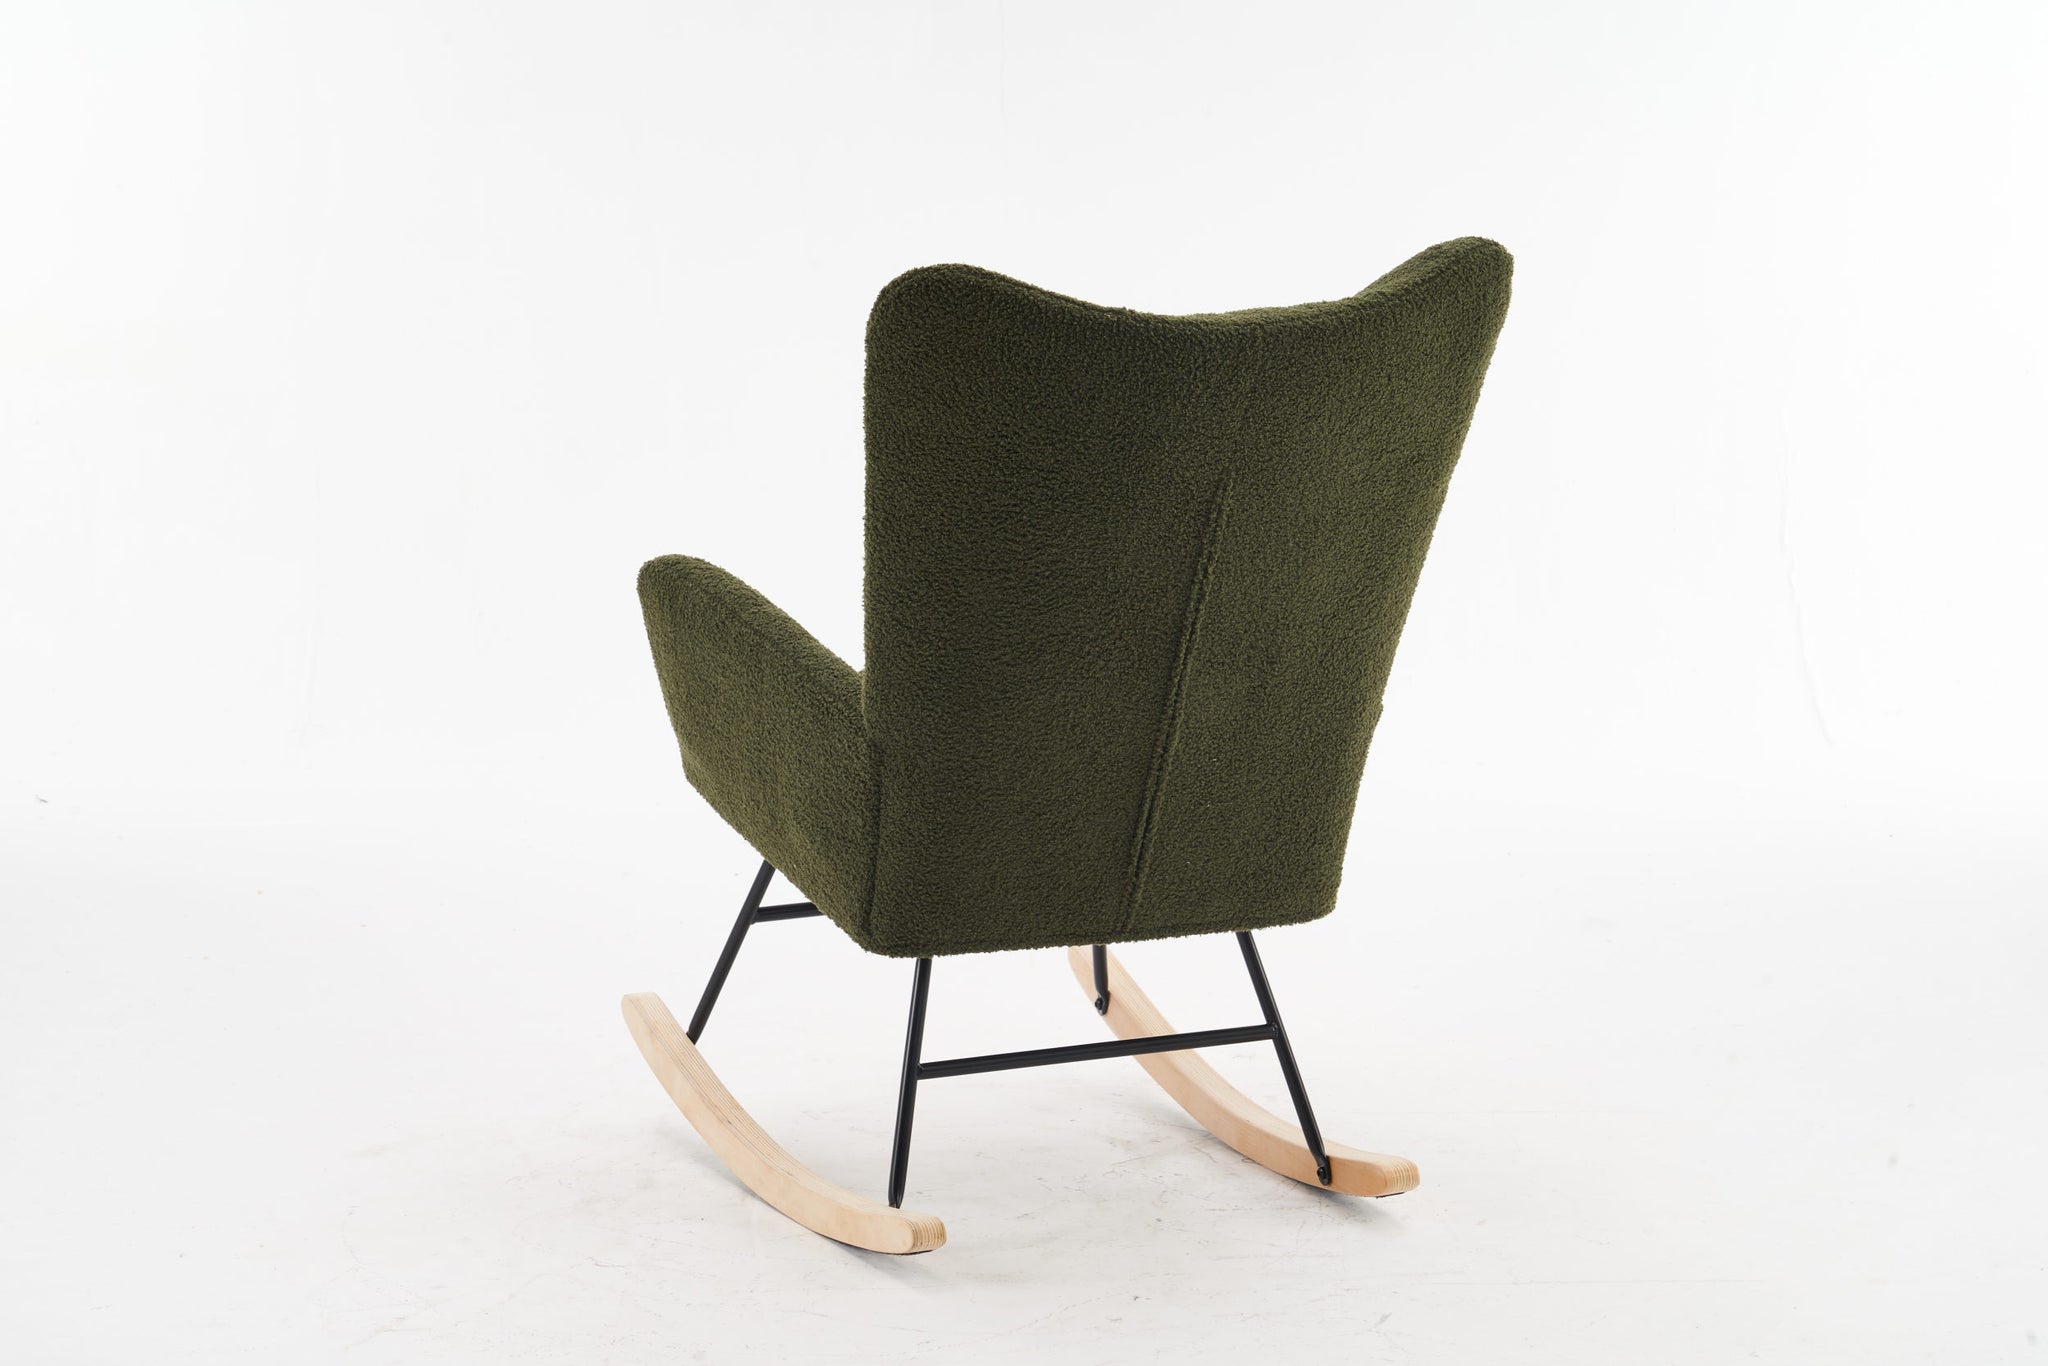 Rocking Chair Nursery, Solid Wood Legs Reading Chair green-primary living space-modern-rocking